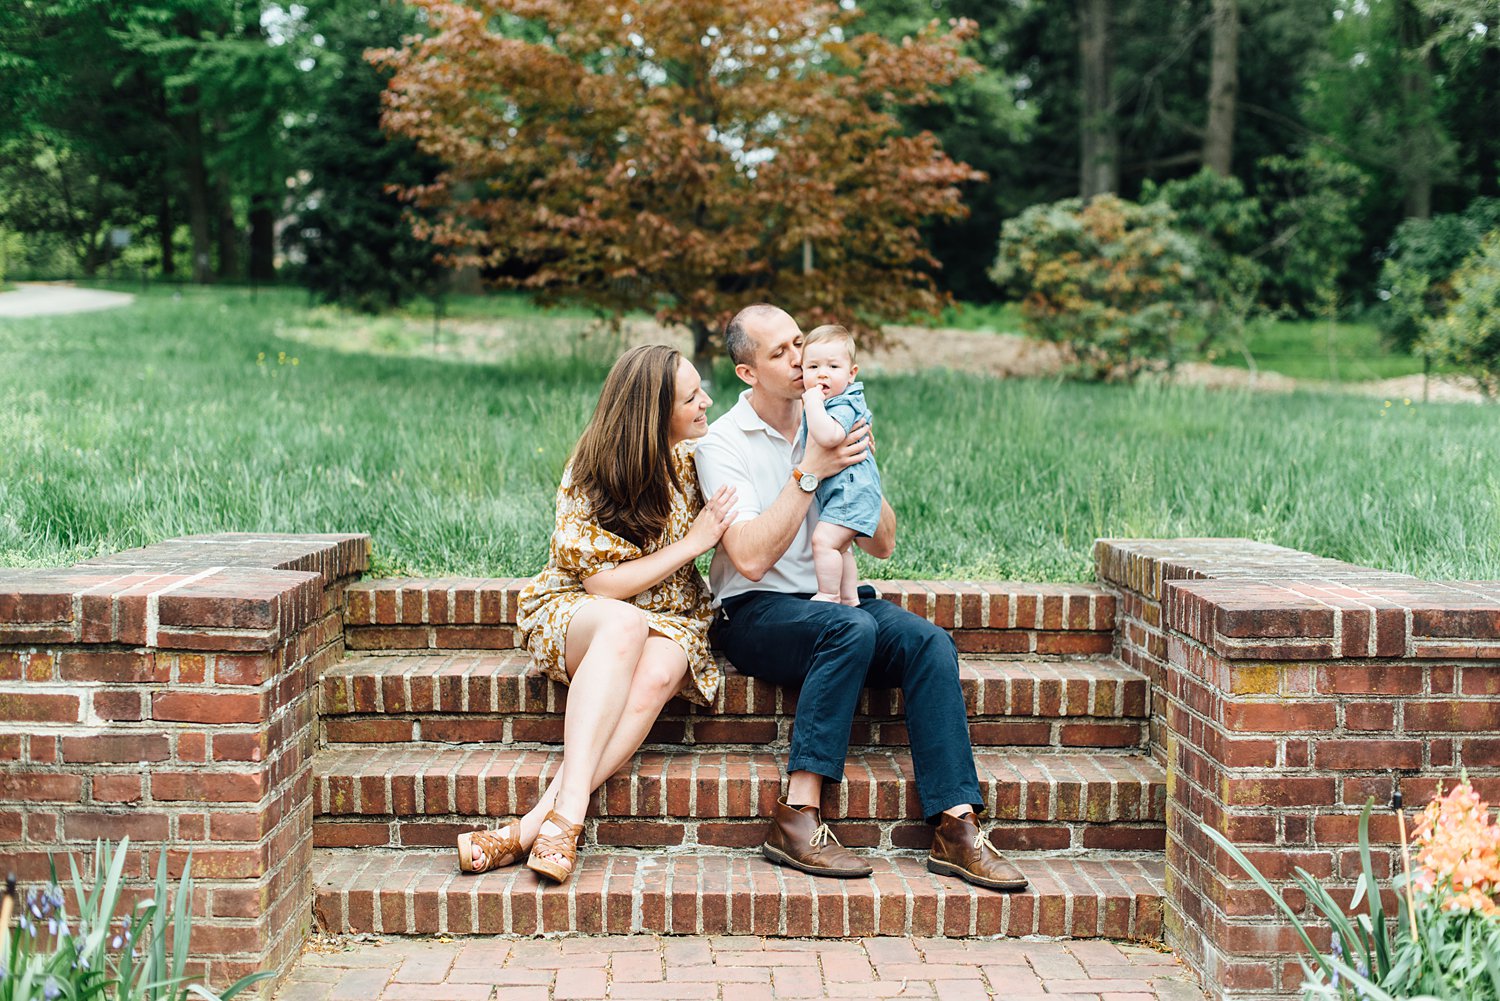 Jenna + Dave + Dylan - Longwood Gardens Family Session - Chester County Family Photographer - Alison Dunn Photography photo